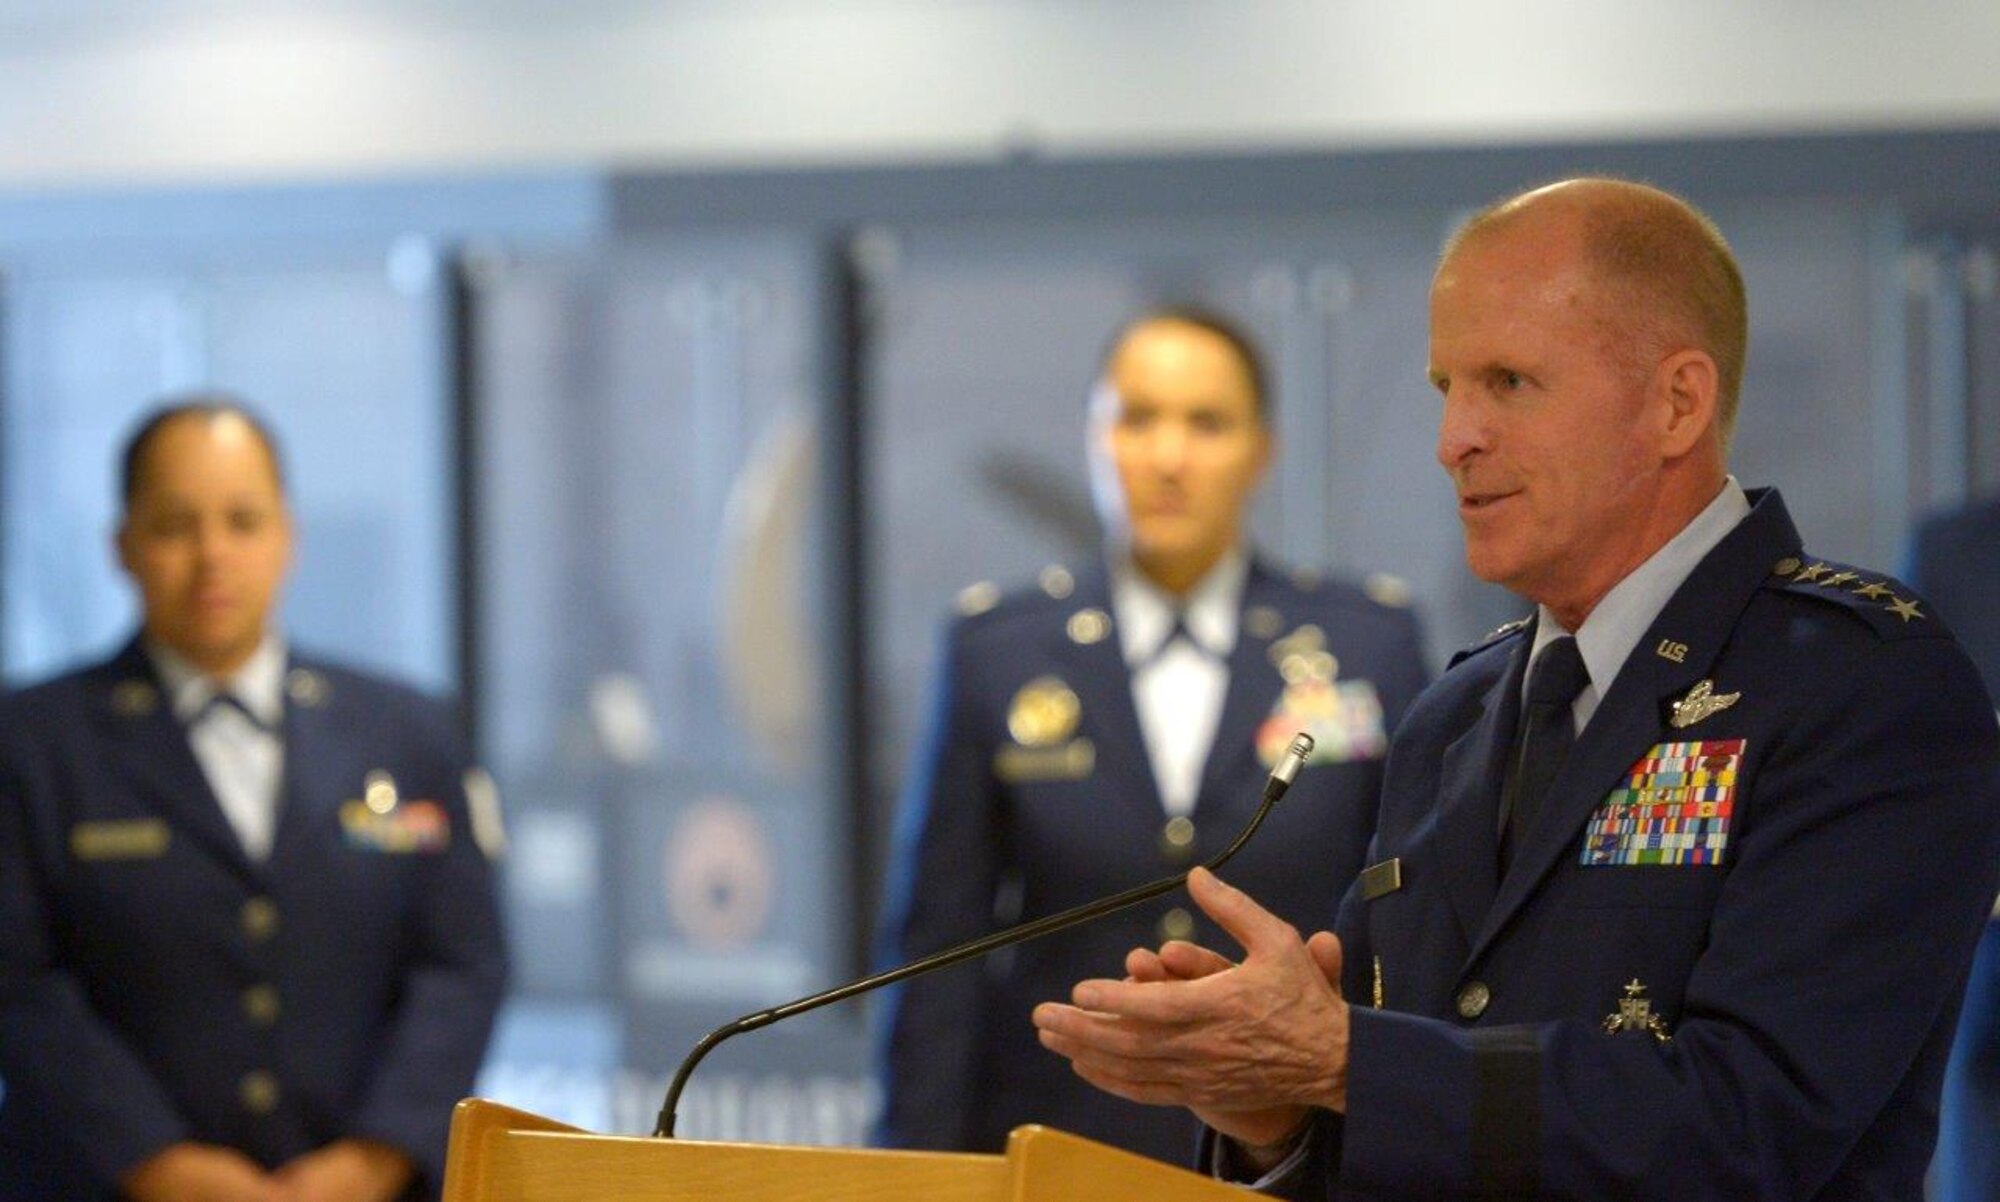 Air Force Vice Chief of Staff Gen. Stephen W. Wilson speaks during an awards ceremony in the Pentagon, Arlington, Va., Oct. 5, 2017. During the ceremony, Wilson presented the 2016 Lance P. Sijan U.S. Air Force Leadership Award to four Airmen. (U.S. Air Force photo by Staff Sgt. Rusty Frank)